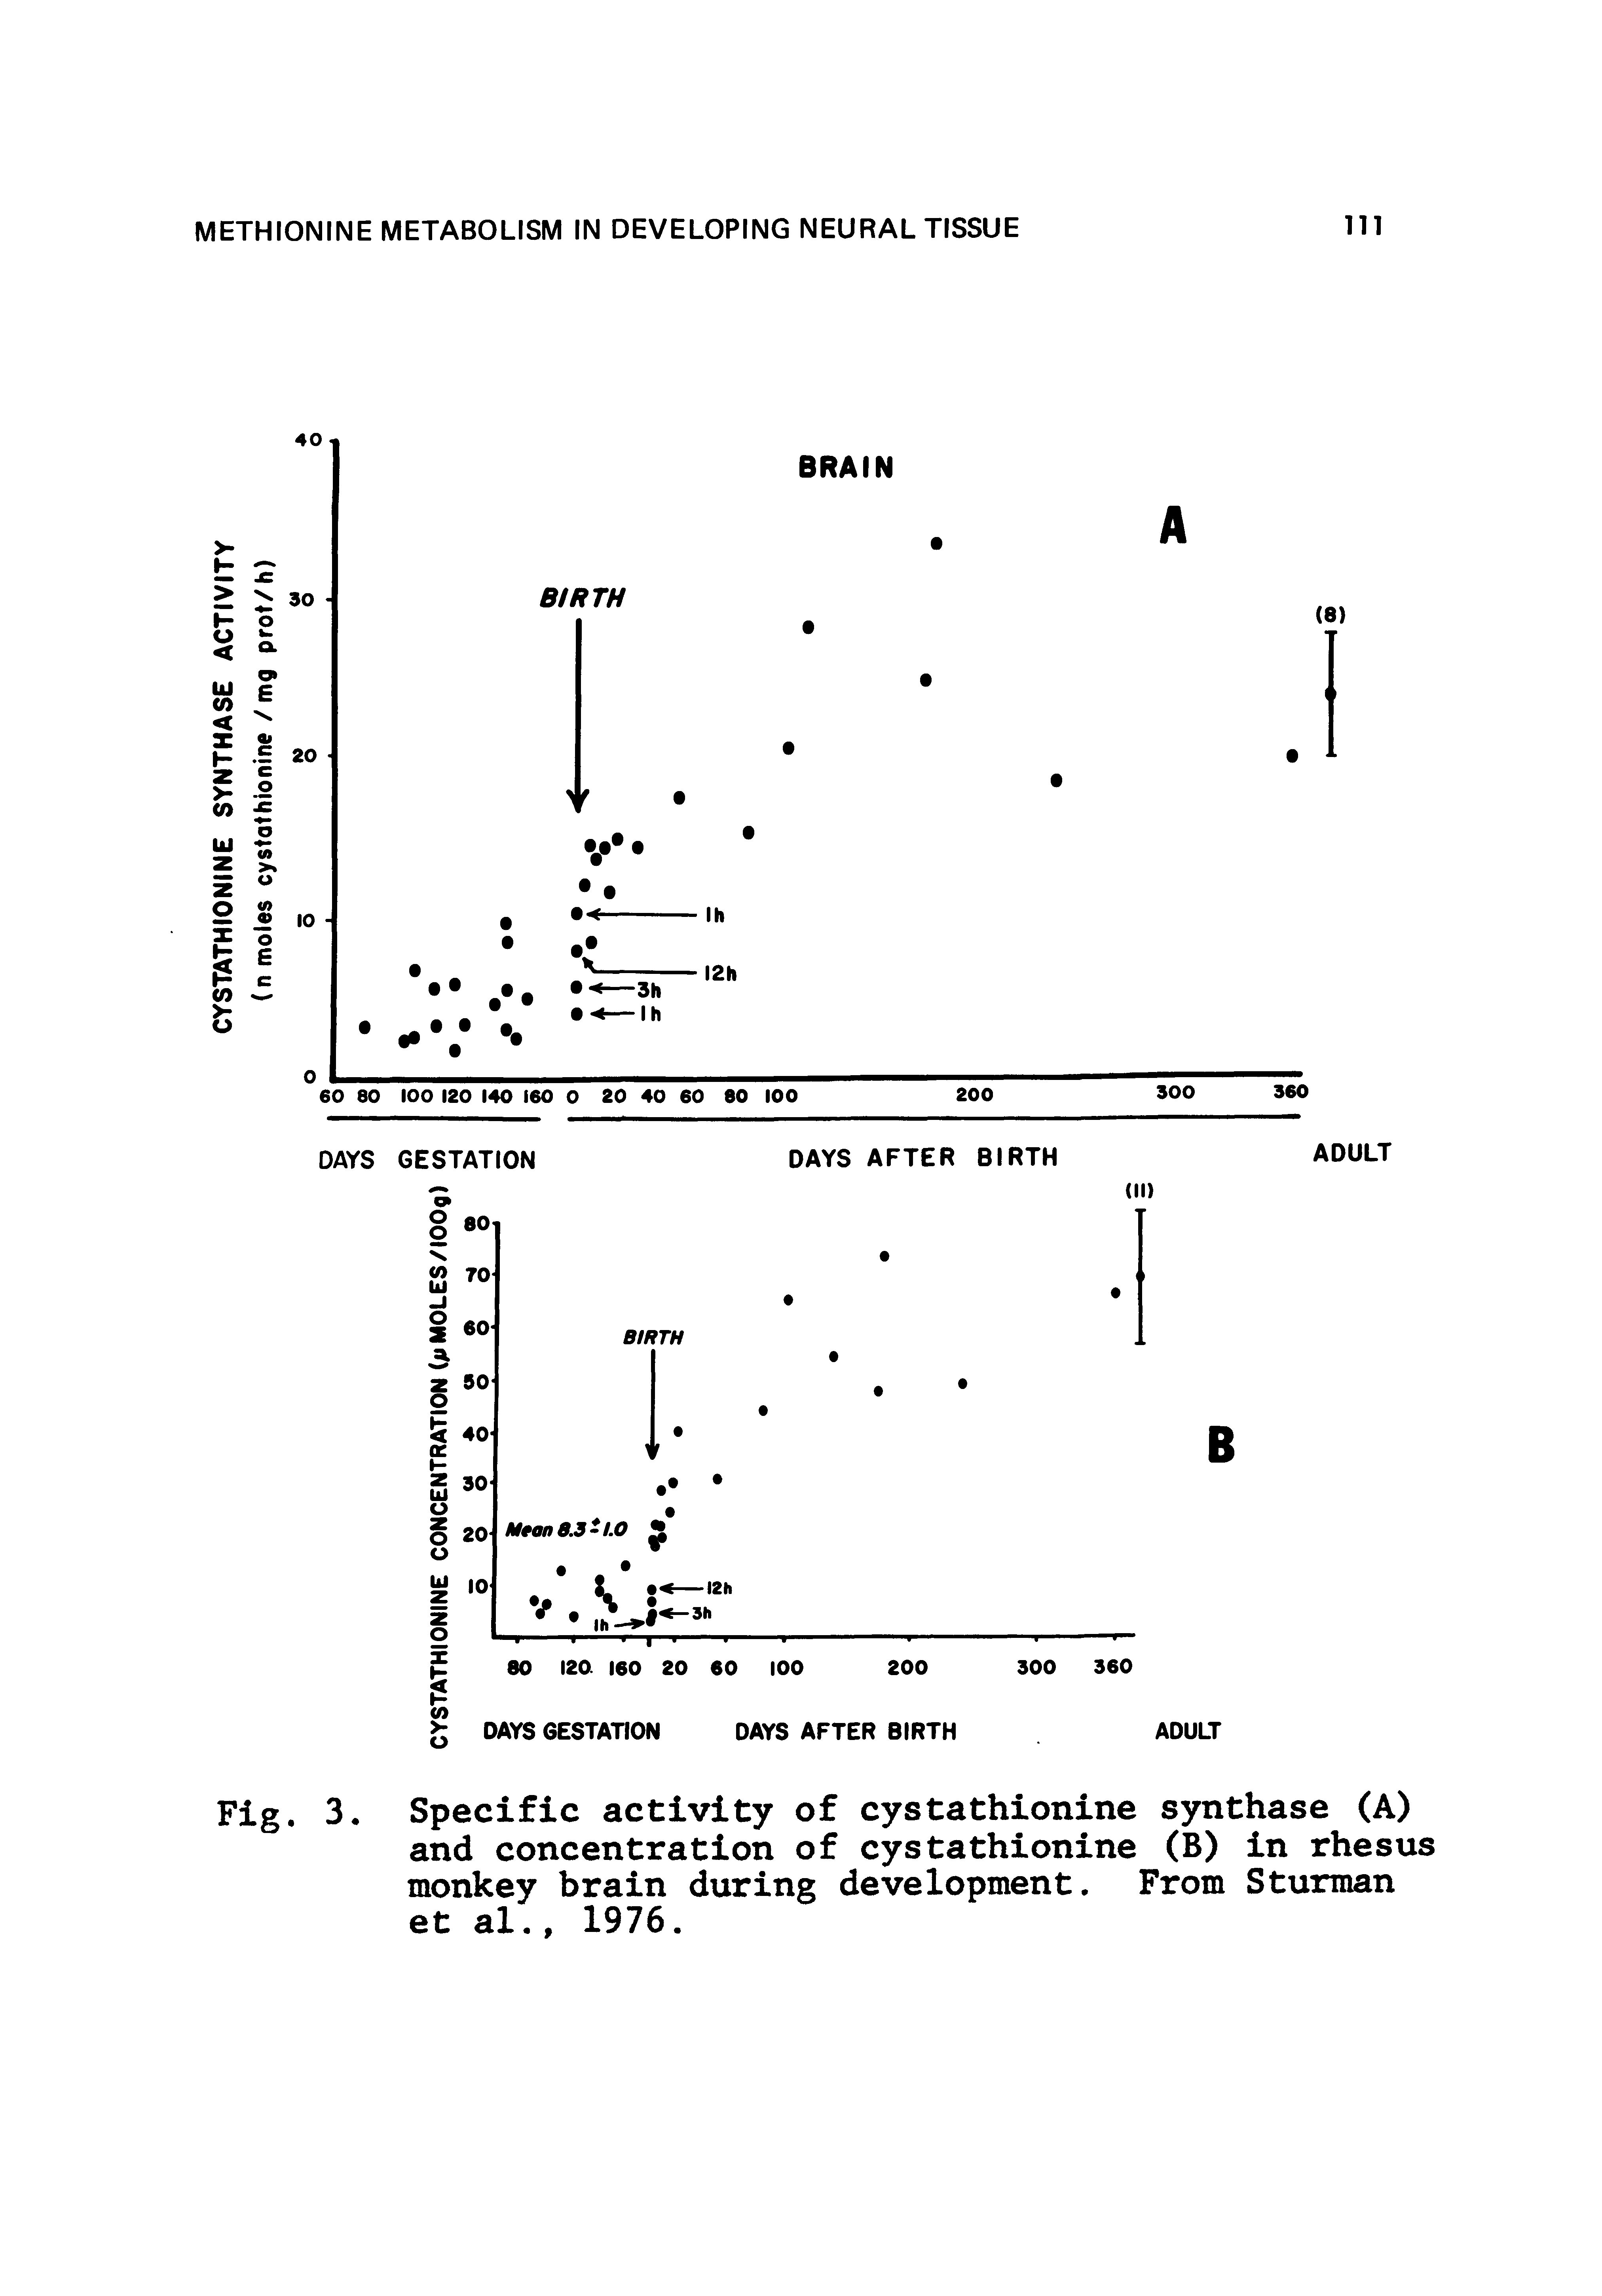 Fig. 3 Specific activity of cystathionine synthase (A) and concentration of cystathionine (B) in rhesus monkey brain during development. From Sturman et al., 1976.